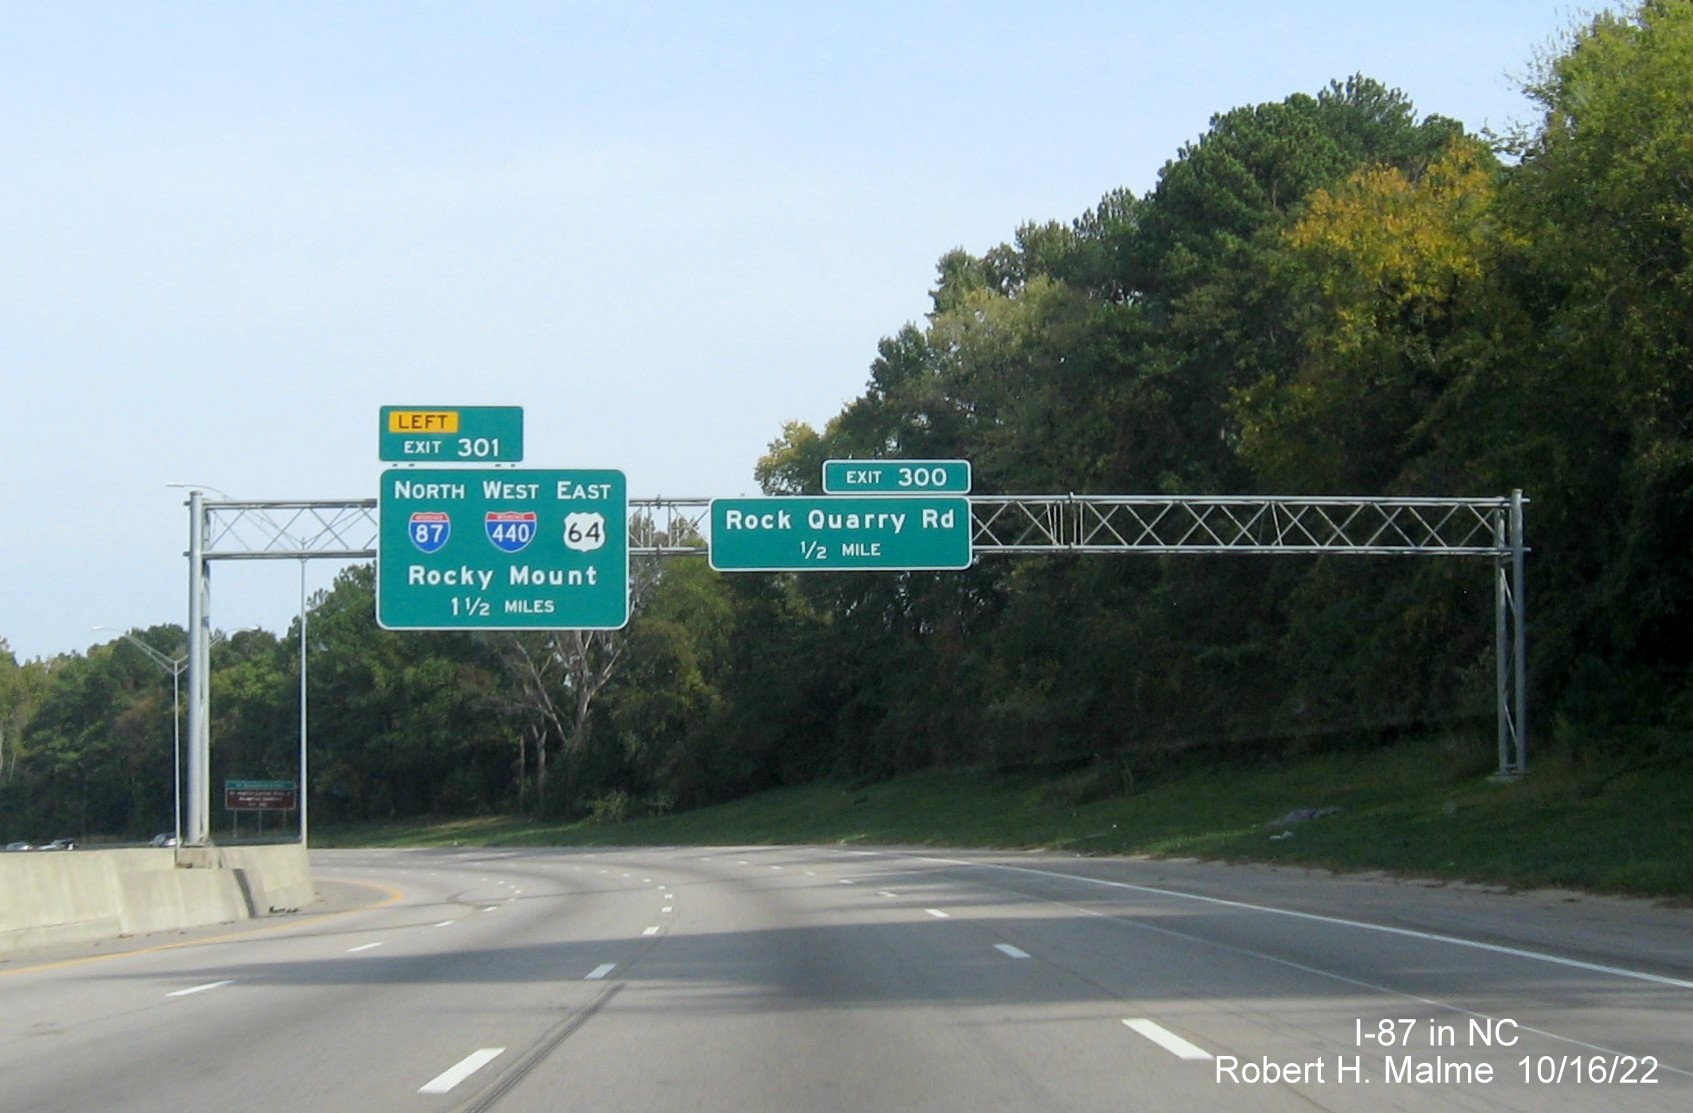 Image of 1 1/2 Miles advance overhead sign for I-87 North/I-440 West/US 64 East on I-40/US 64 East 
                                        in Raleigh, October 2022